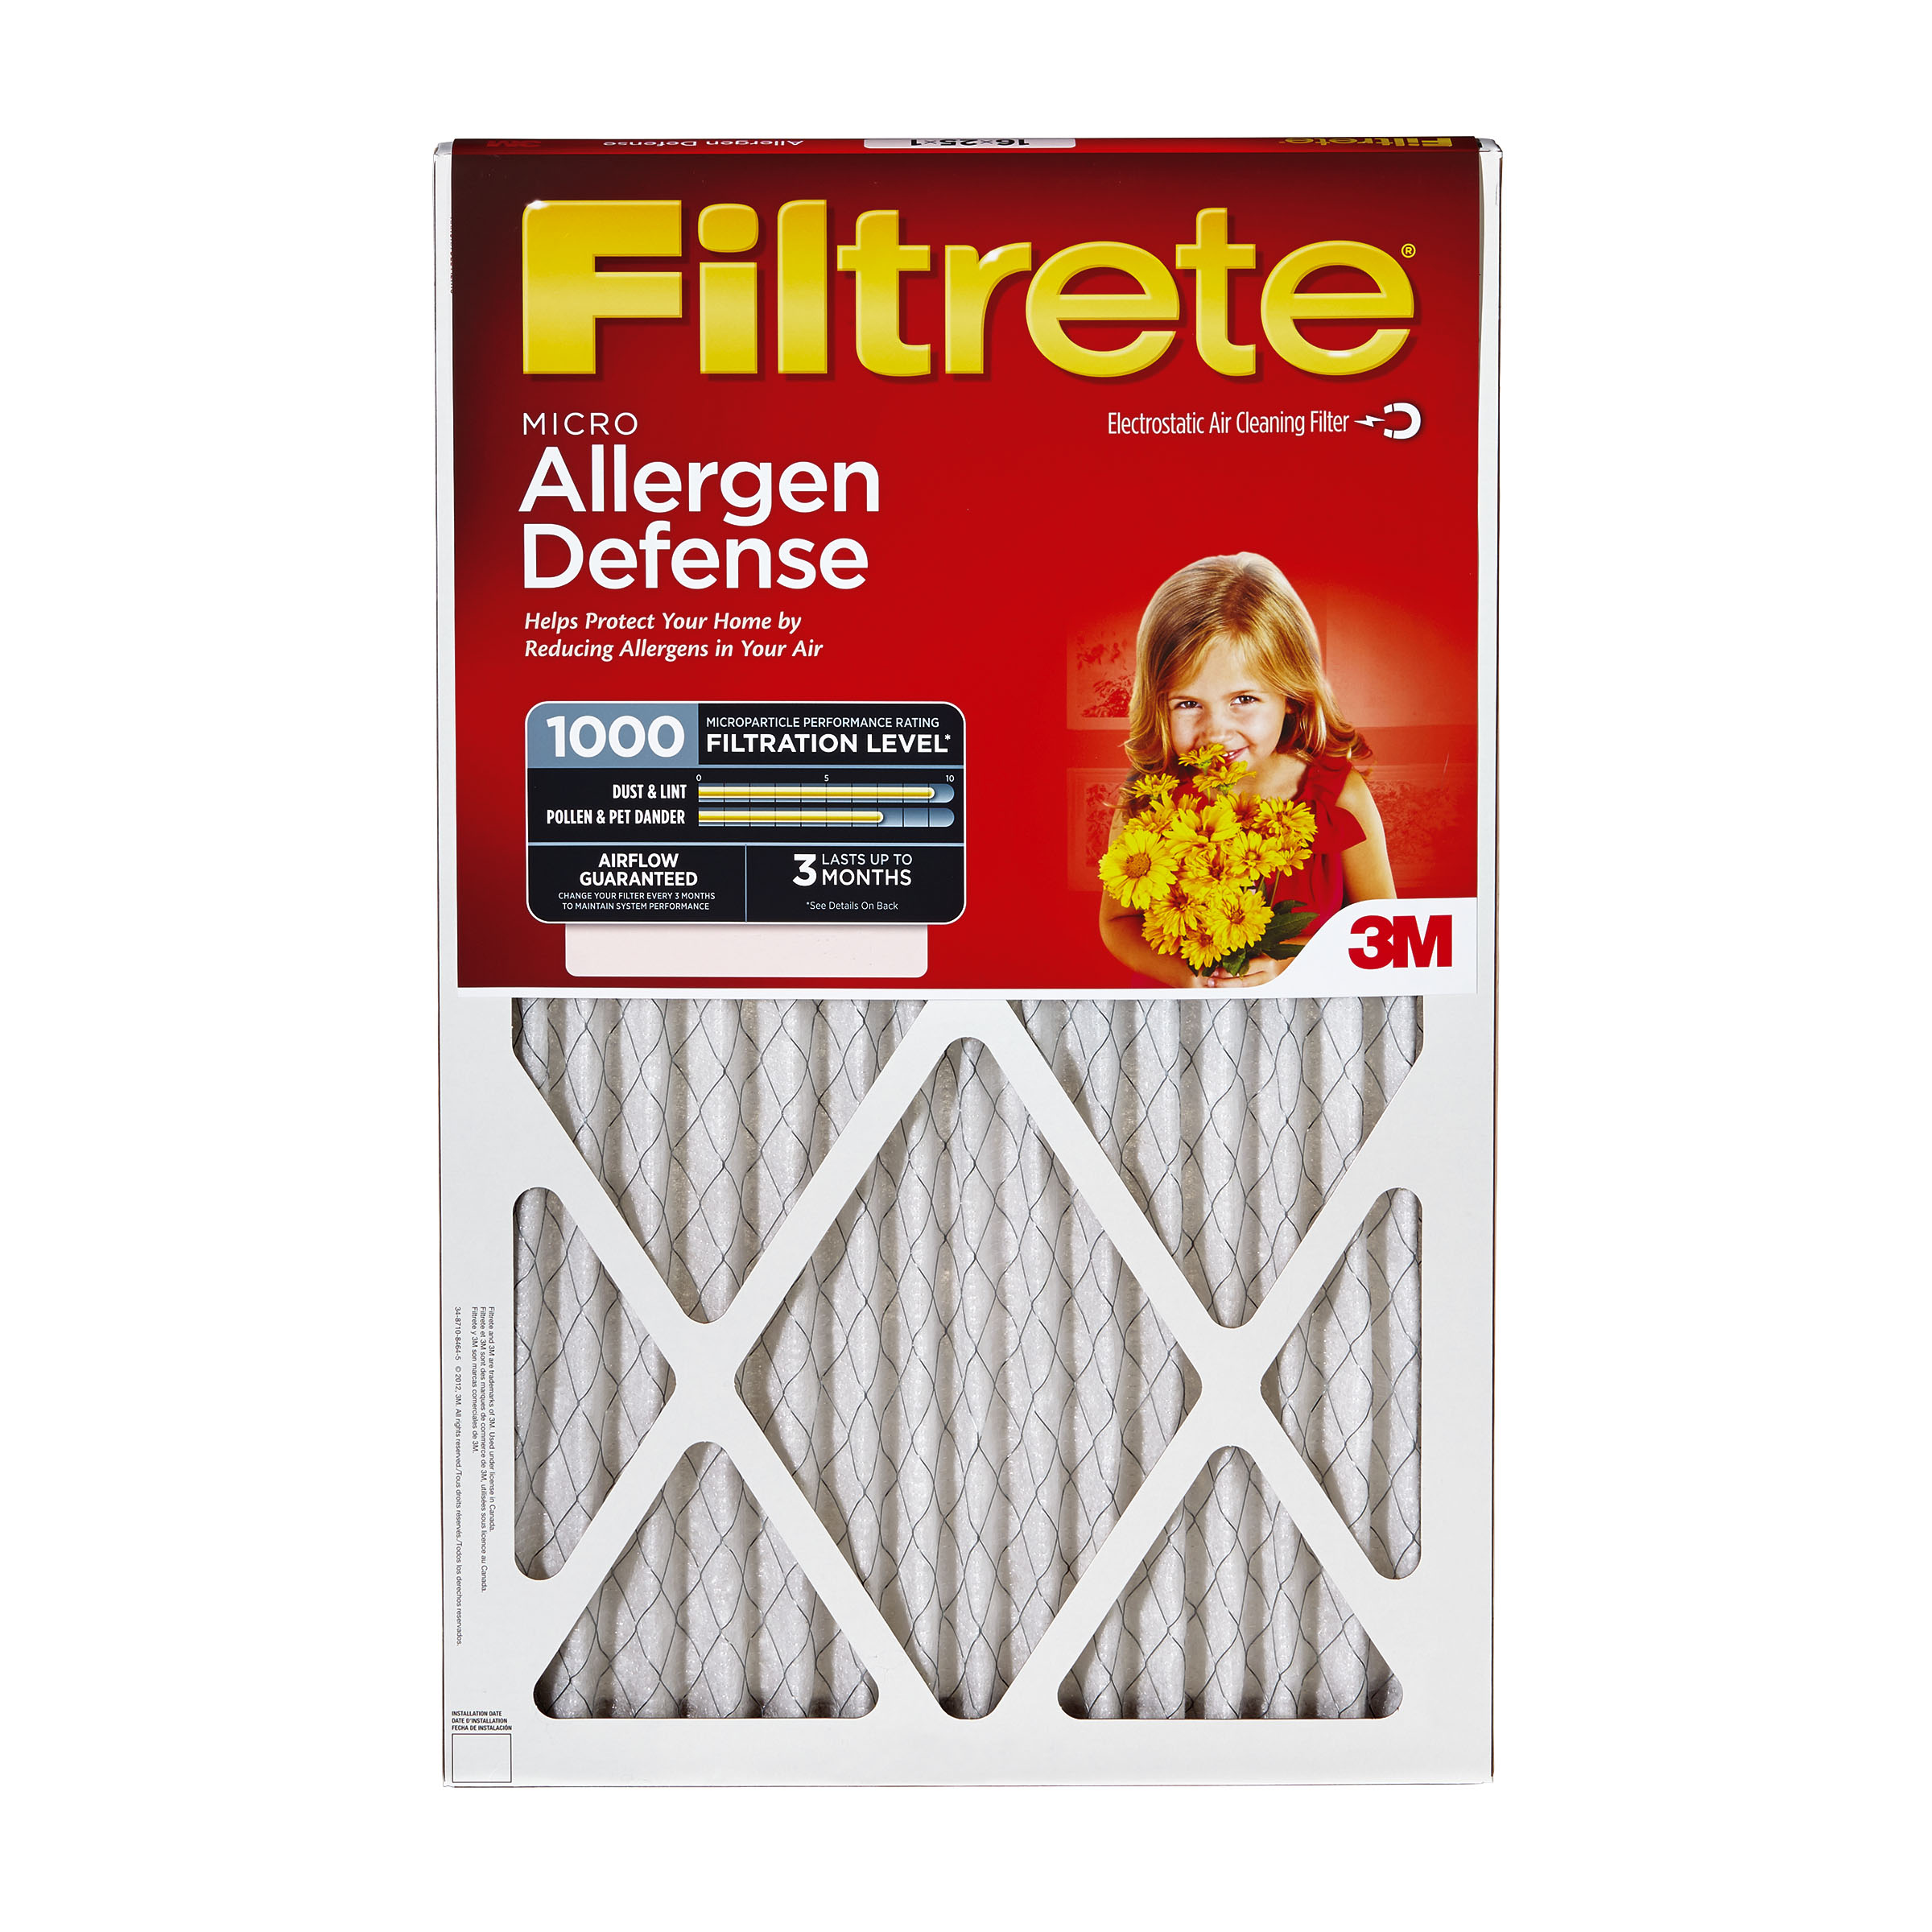 https://e-aircraftsupply.com/ItemImages/70/7010369470_Filtrete_Micro_Allergen_Reduction_Filters_9805-4pk.jpg